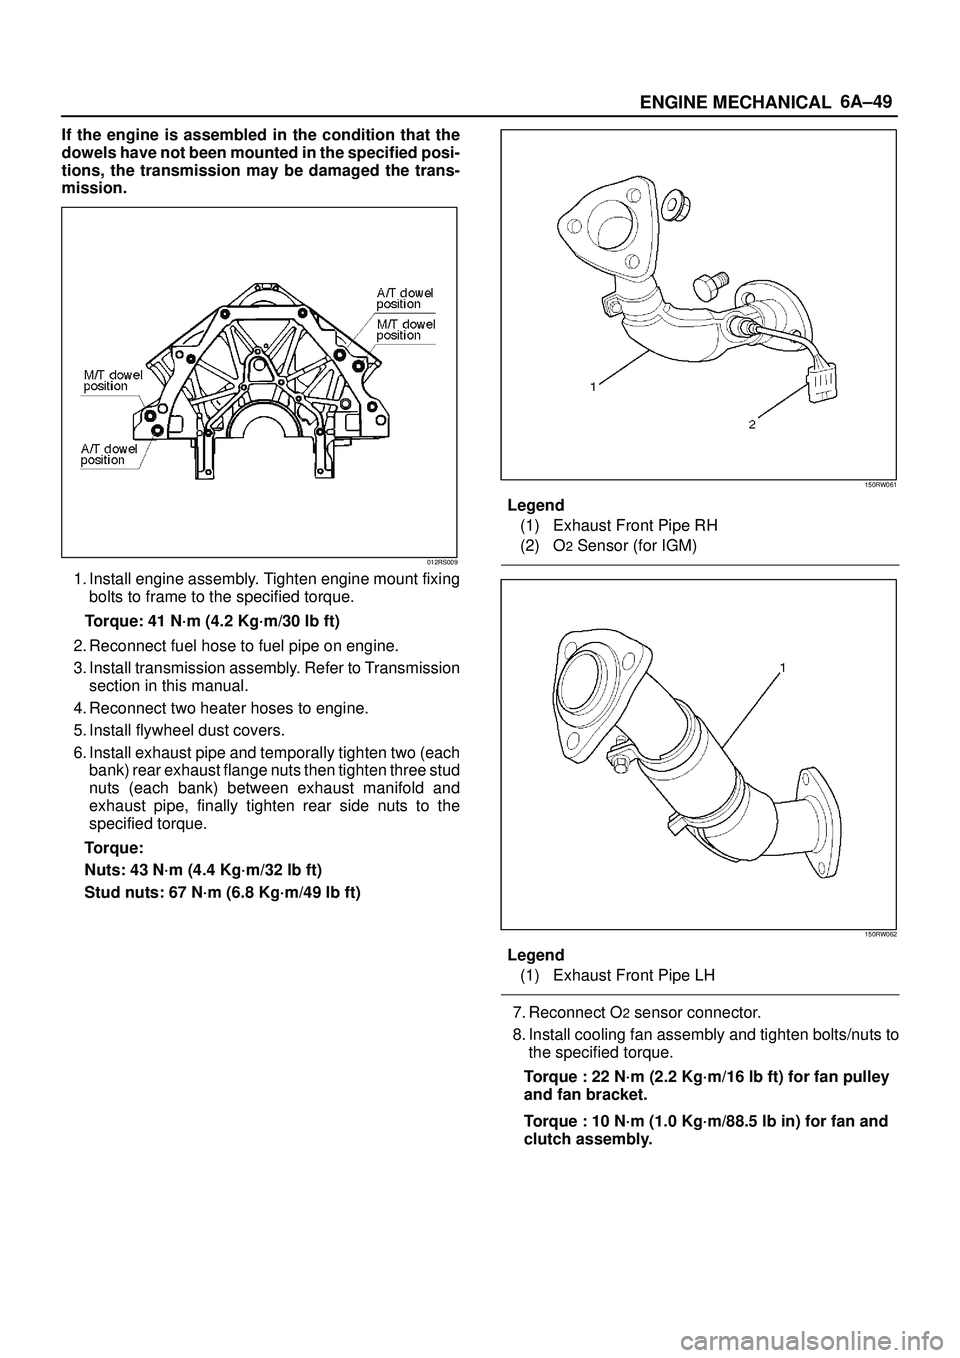 ISUZU TROOPER 1998  Service Owners Guide 6A±49
ENGINE MECHANICAL
If the engine is assembled in the condition that the
dowels have not been mounted in the specified posi-
tions, the transmission may be damaged the trans-
mission.
012RS009
1.